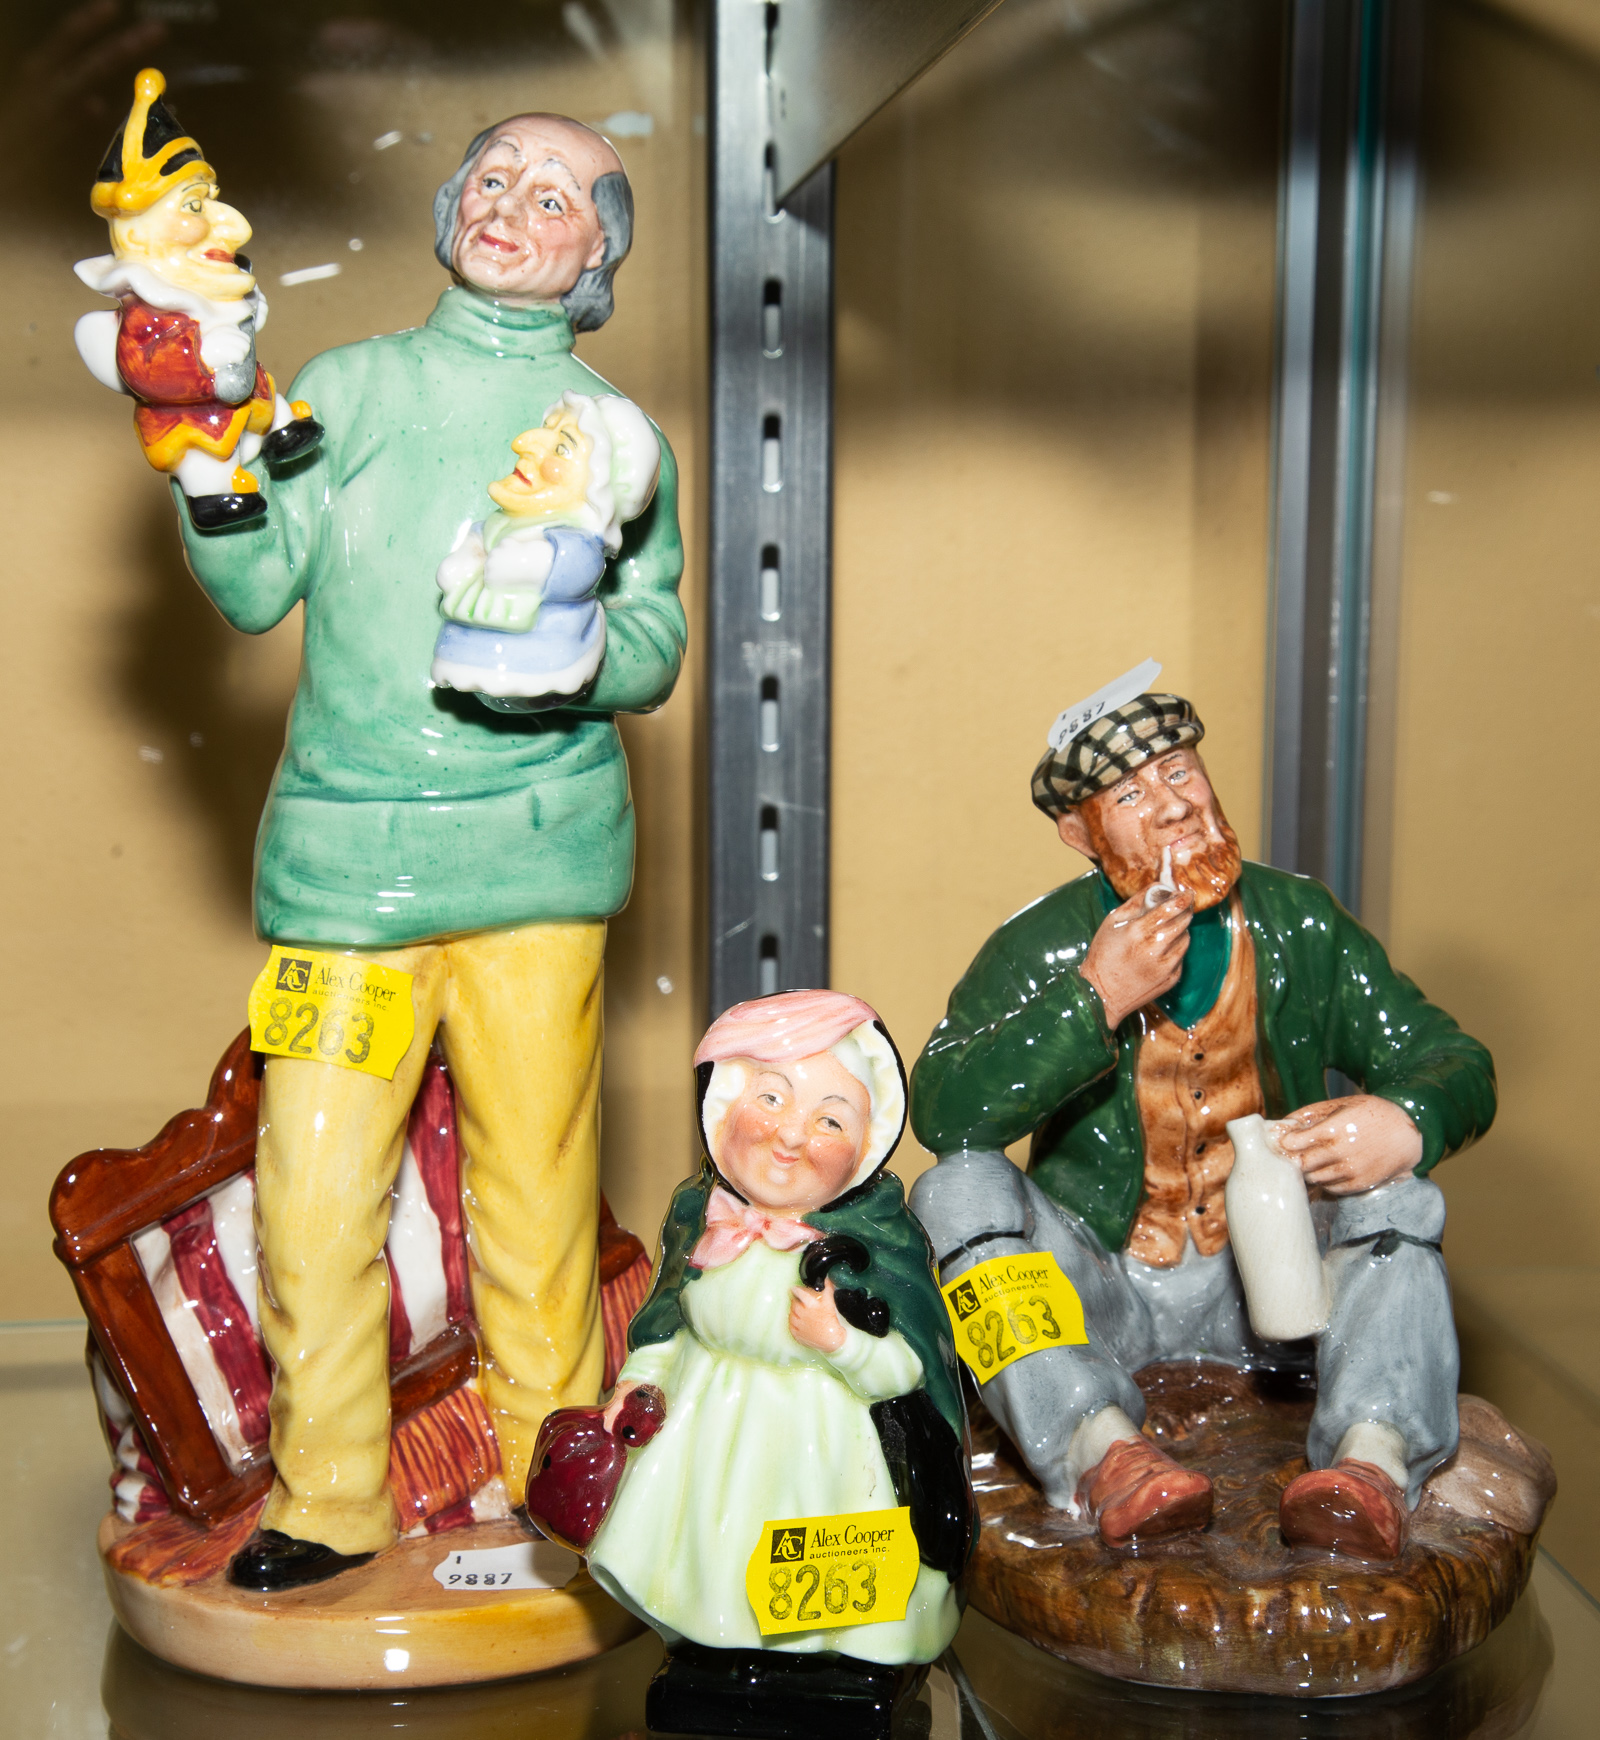 THREE ROYAL DOULTON FIGURES Including